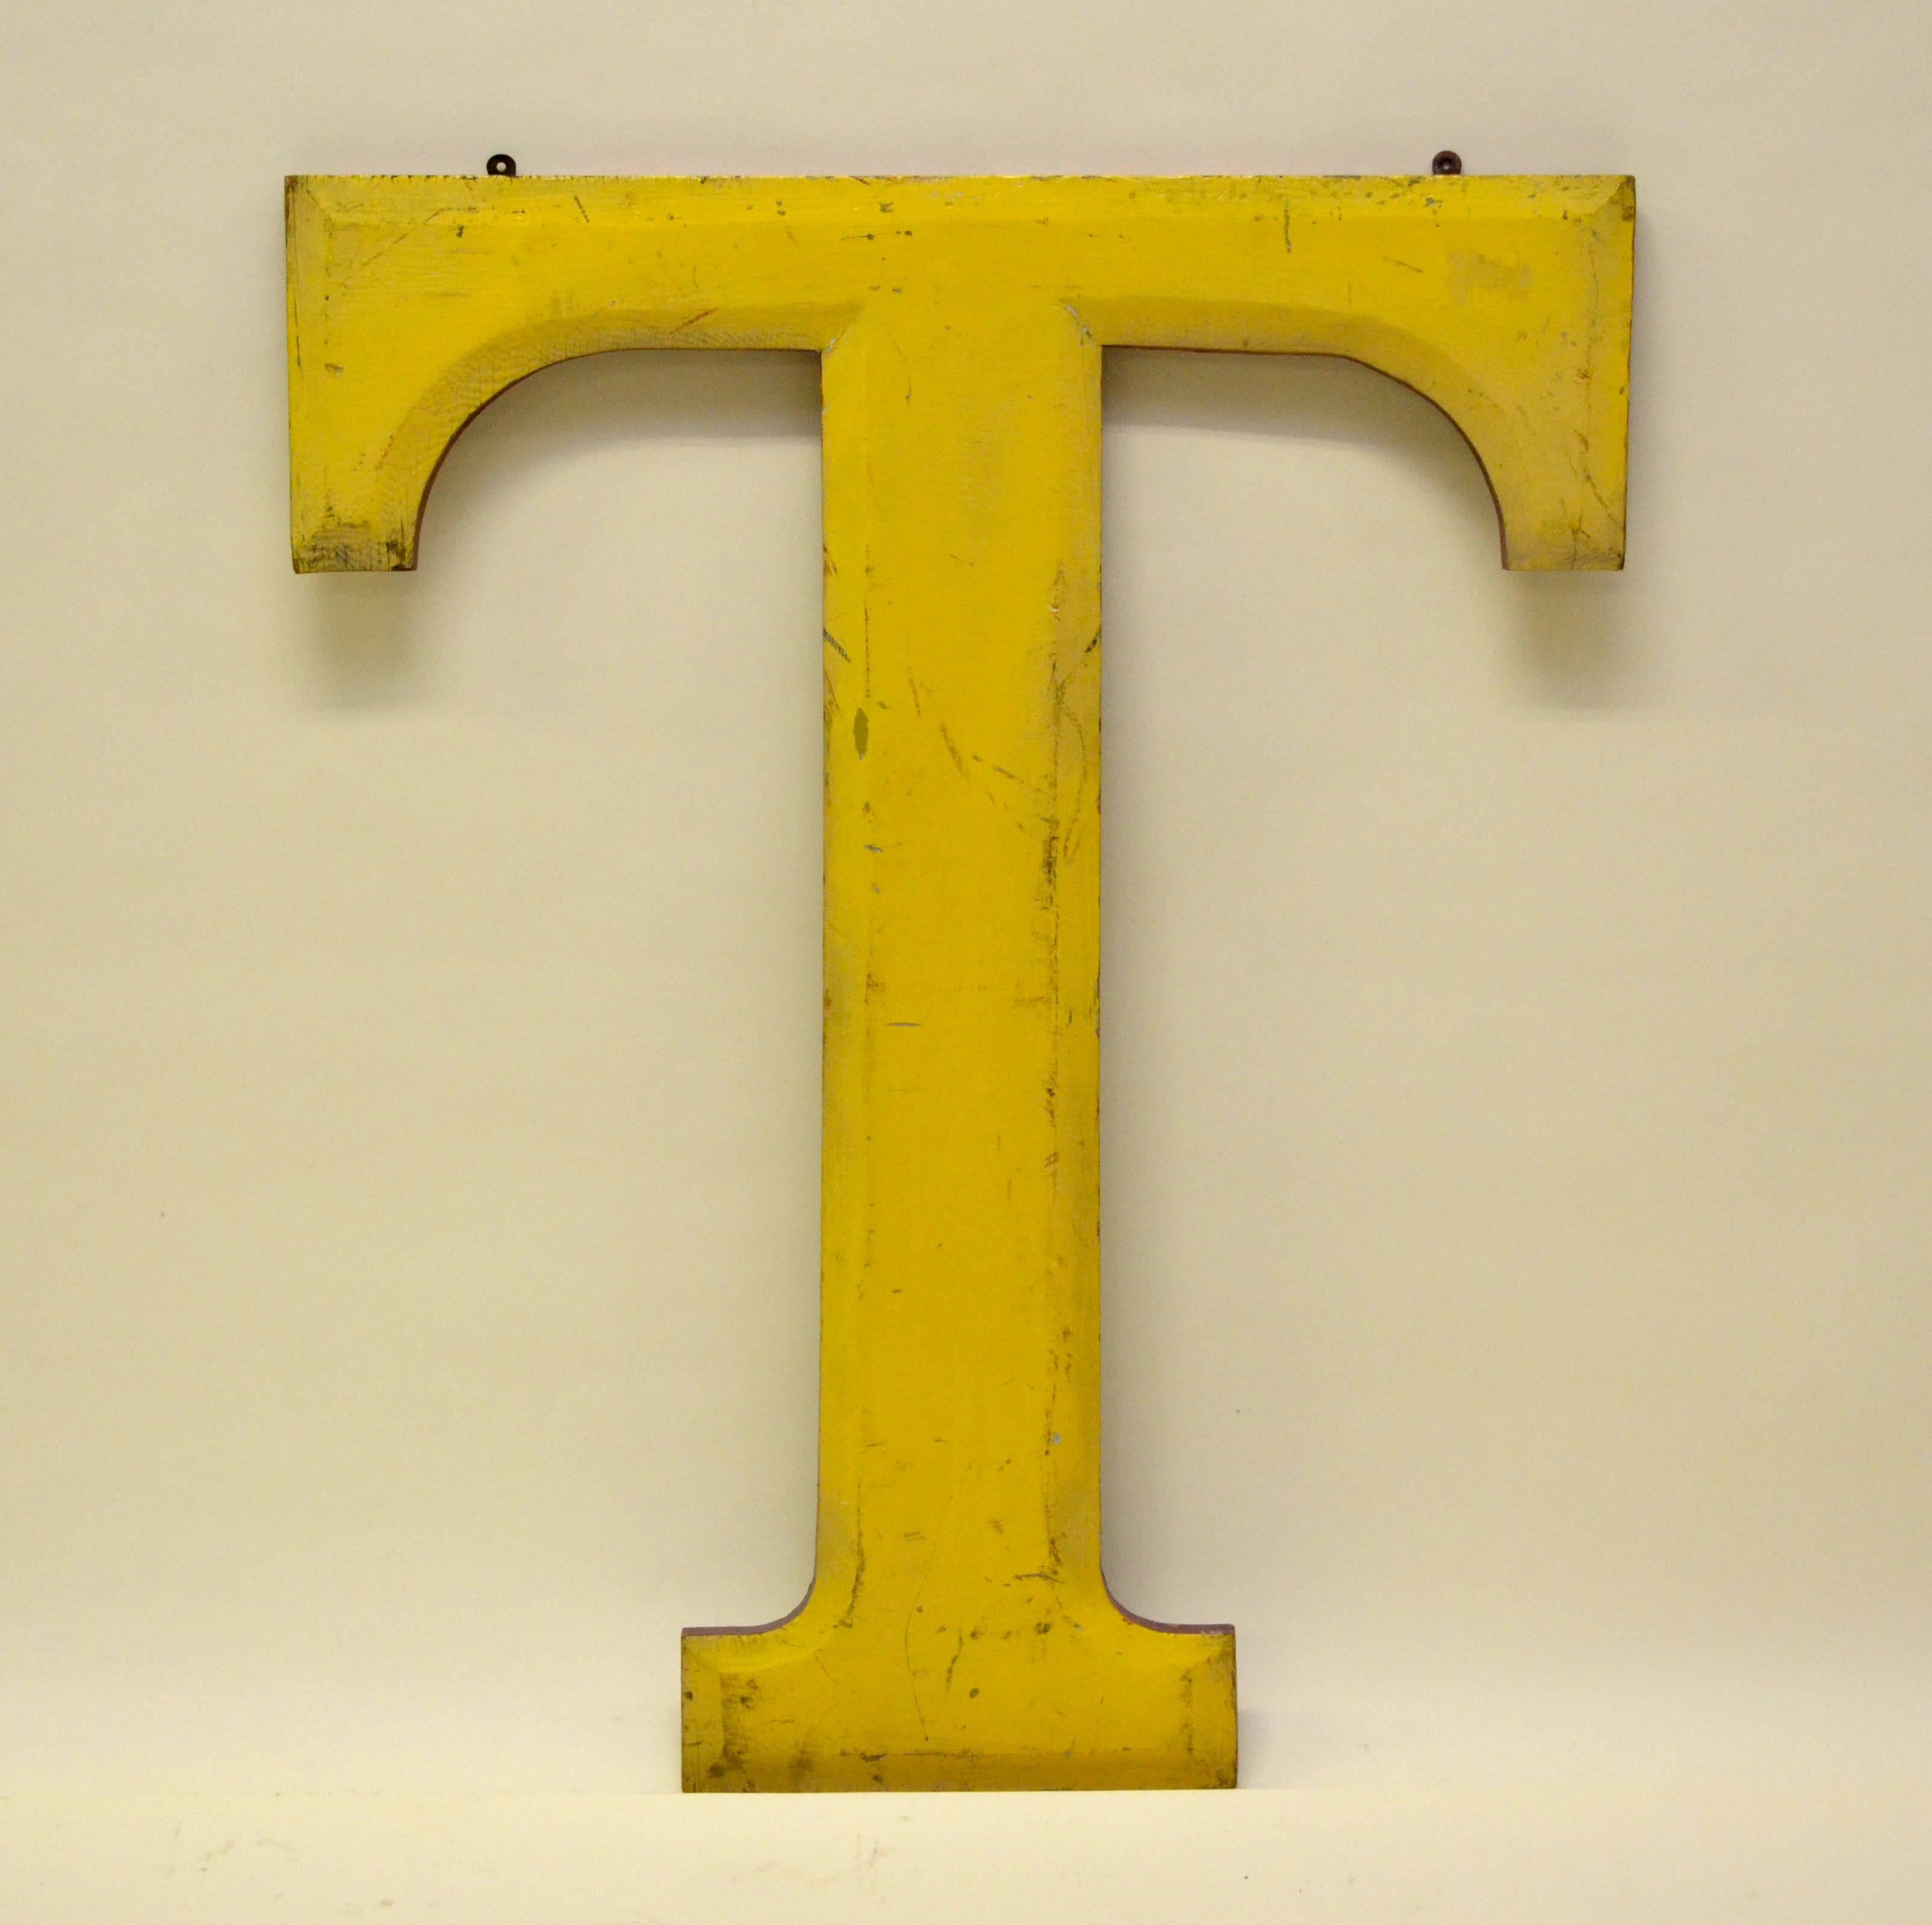 Very large yellow wooden capital letter T with red border made in England probably in the 1960s as part of the sign of a pub.

From the same sign also available in stock letters: R.